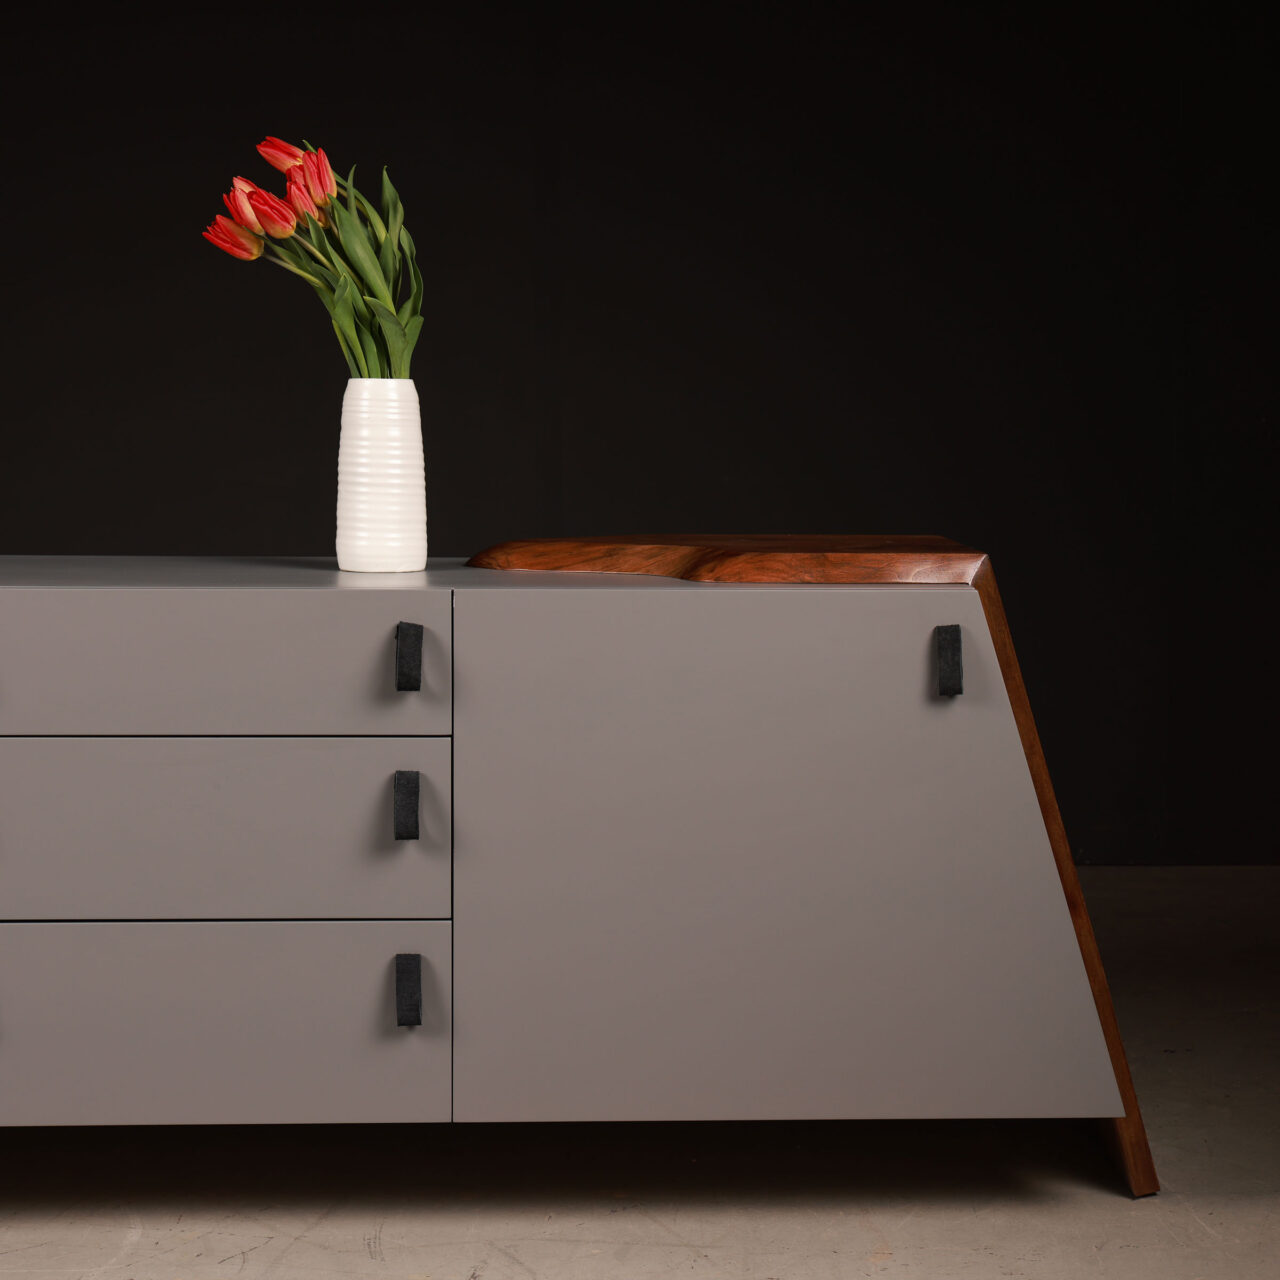 A sleek gray Luxor credenza by SENTIENT Furniture with black handles and a warm wooden top, decorated with a vase of red tulips on a dark gray surface, showcasing a blend of modern and rustic styles in luxury credenzas.